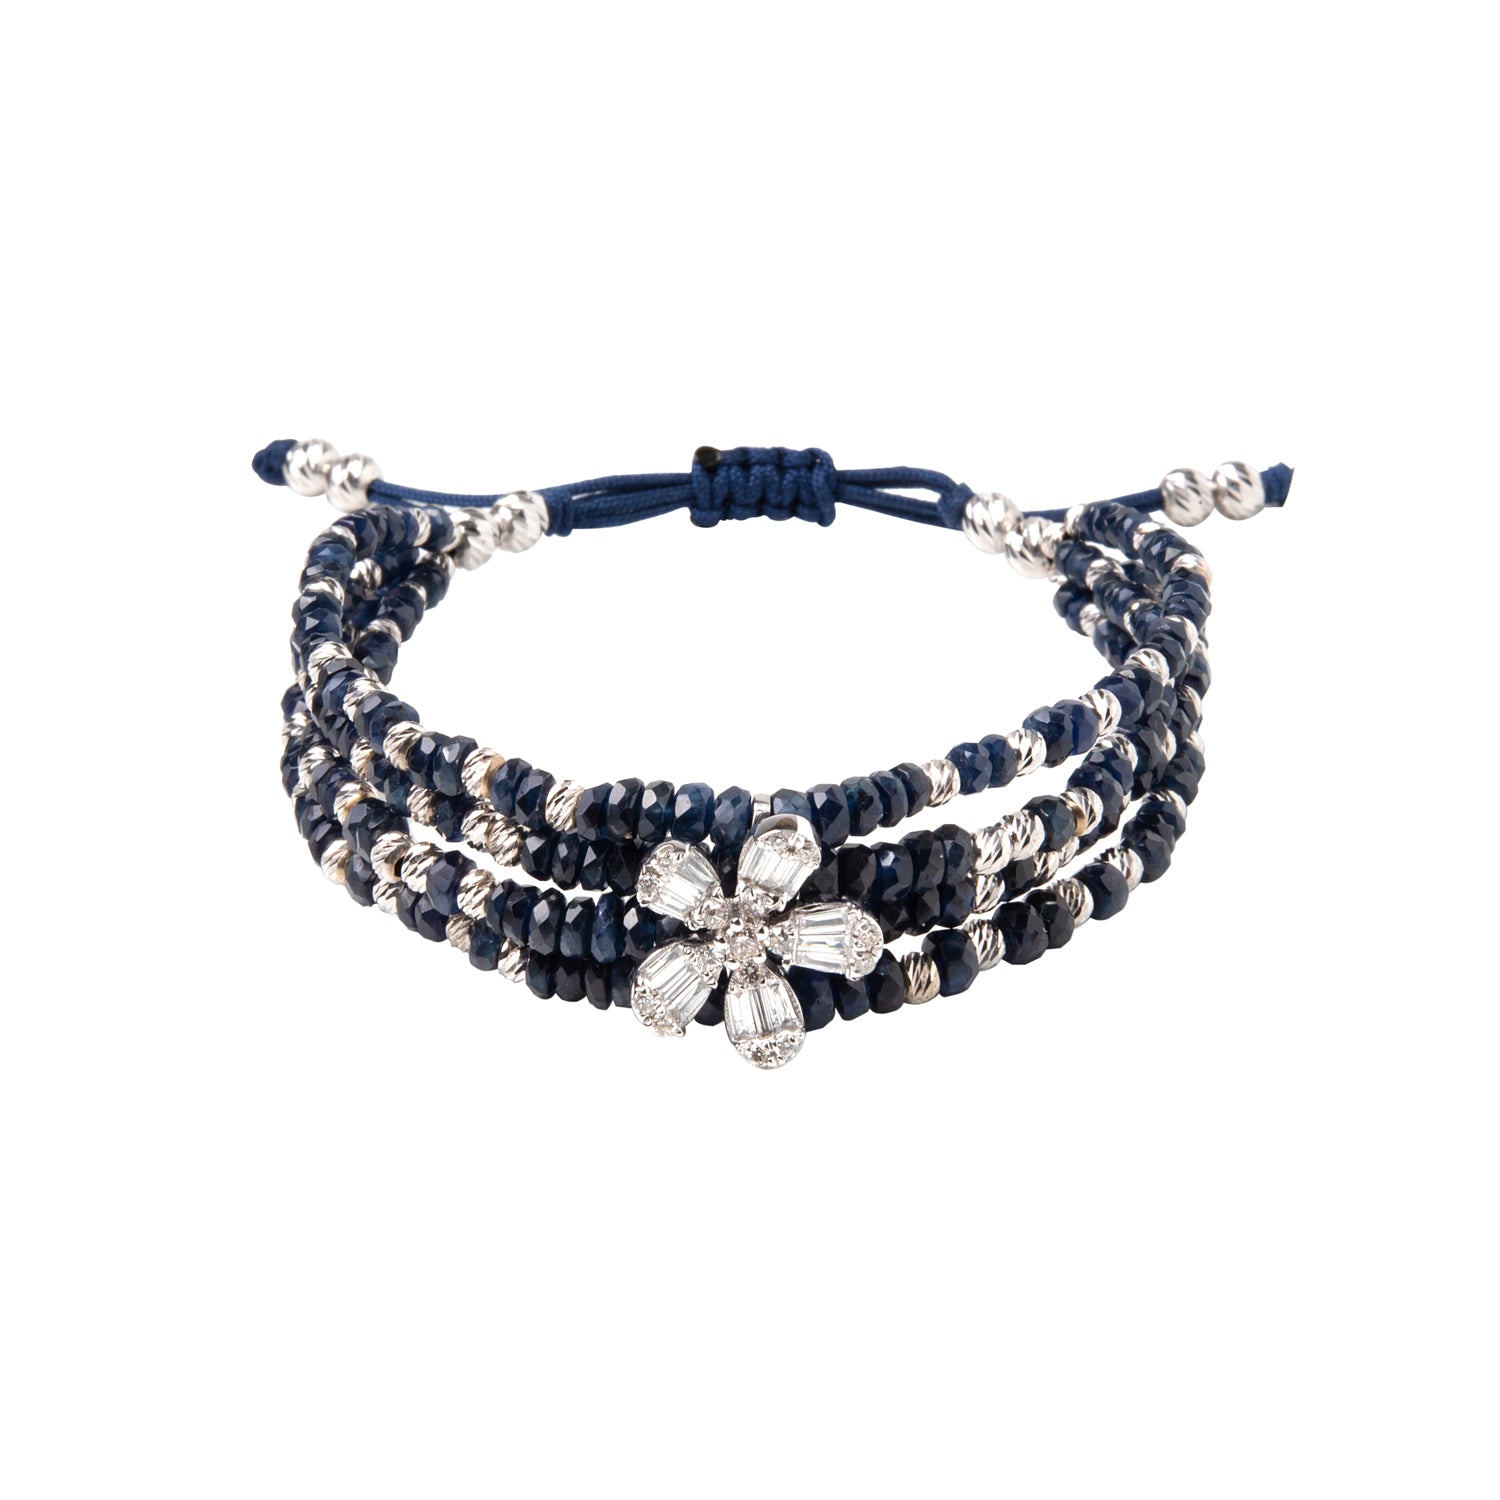 Baquette diamond flower with gold beads and blue sapphire.